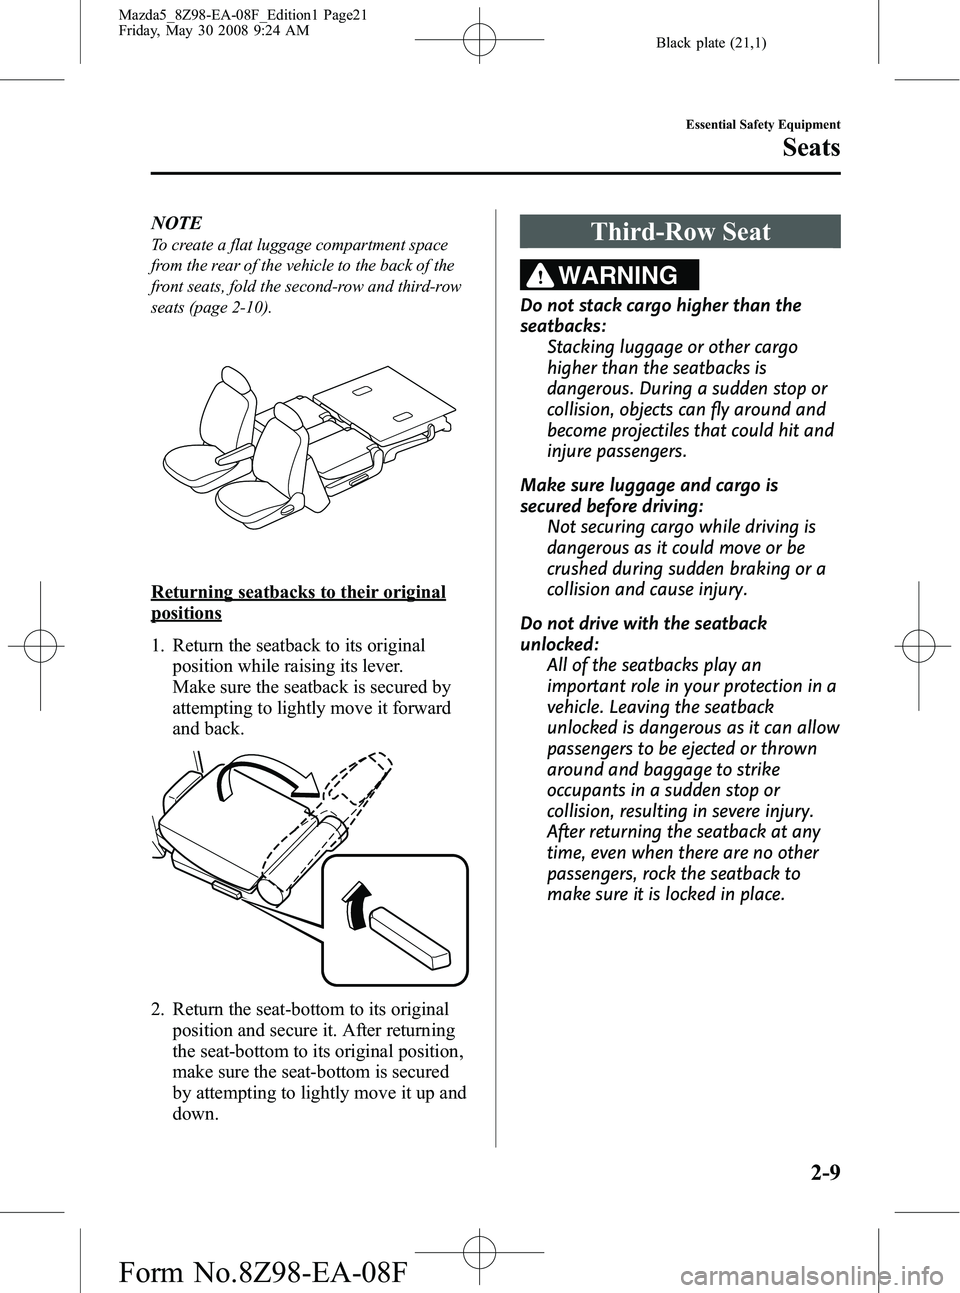 MAZDA MODEL 5 2009  Owners Manual Black plate (21,1)
NOTE
To create a flat luggage compartment space
from the rear of the vehicle to the back of the
front seats, fold the second-row and third-row
seats (page 2-10).
Returning seatbacks